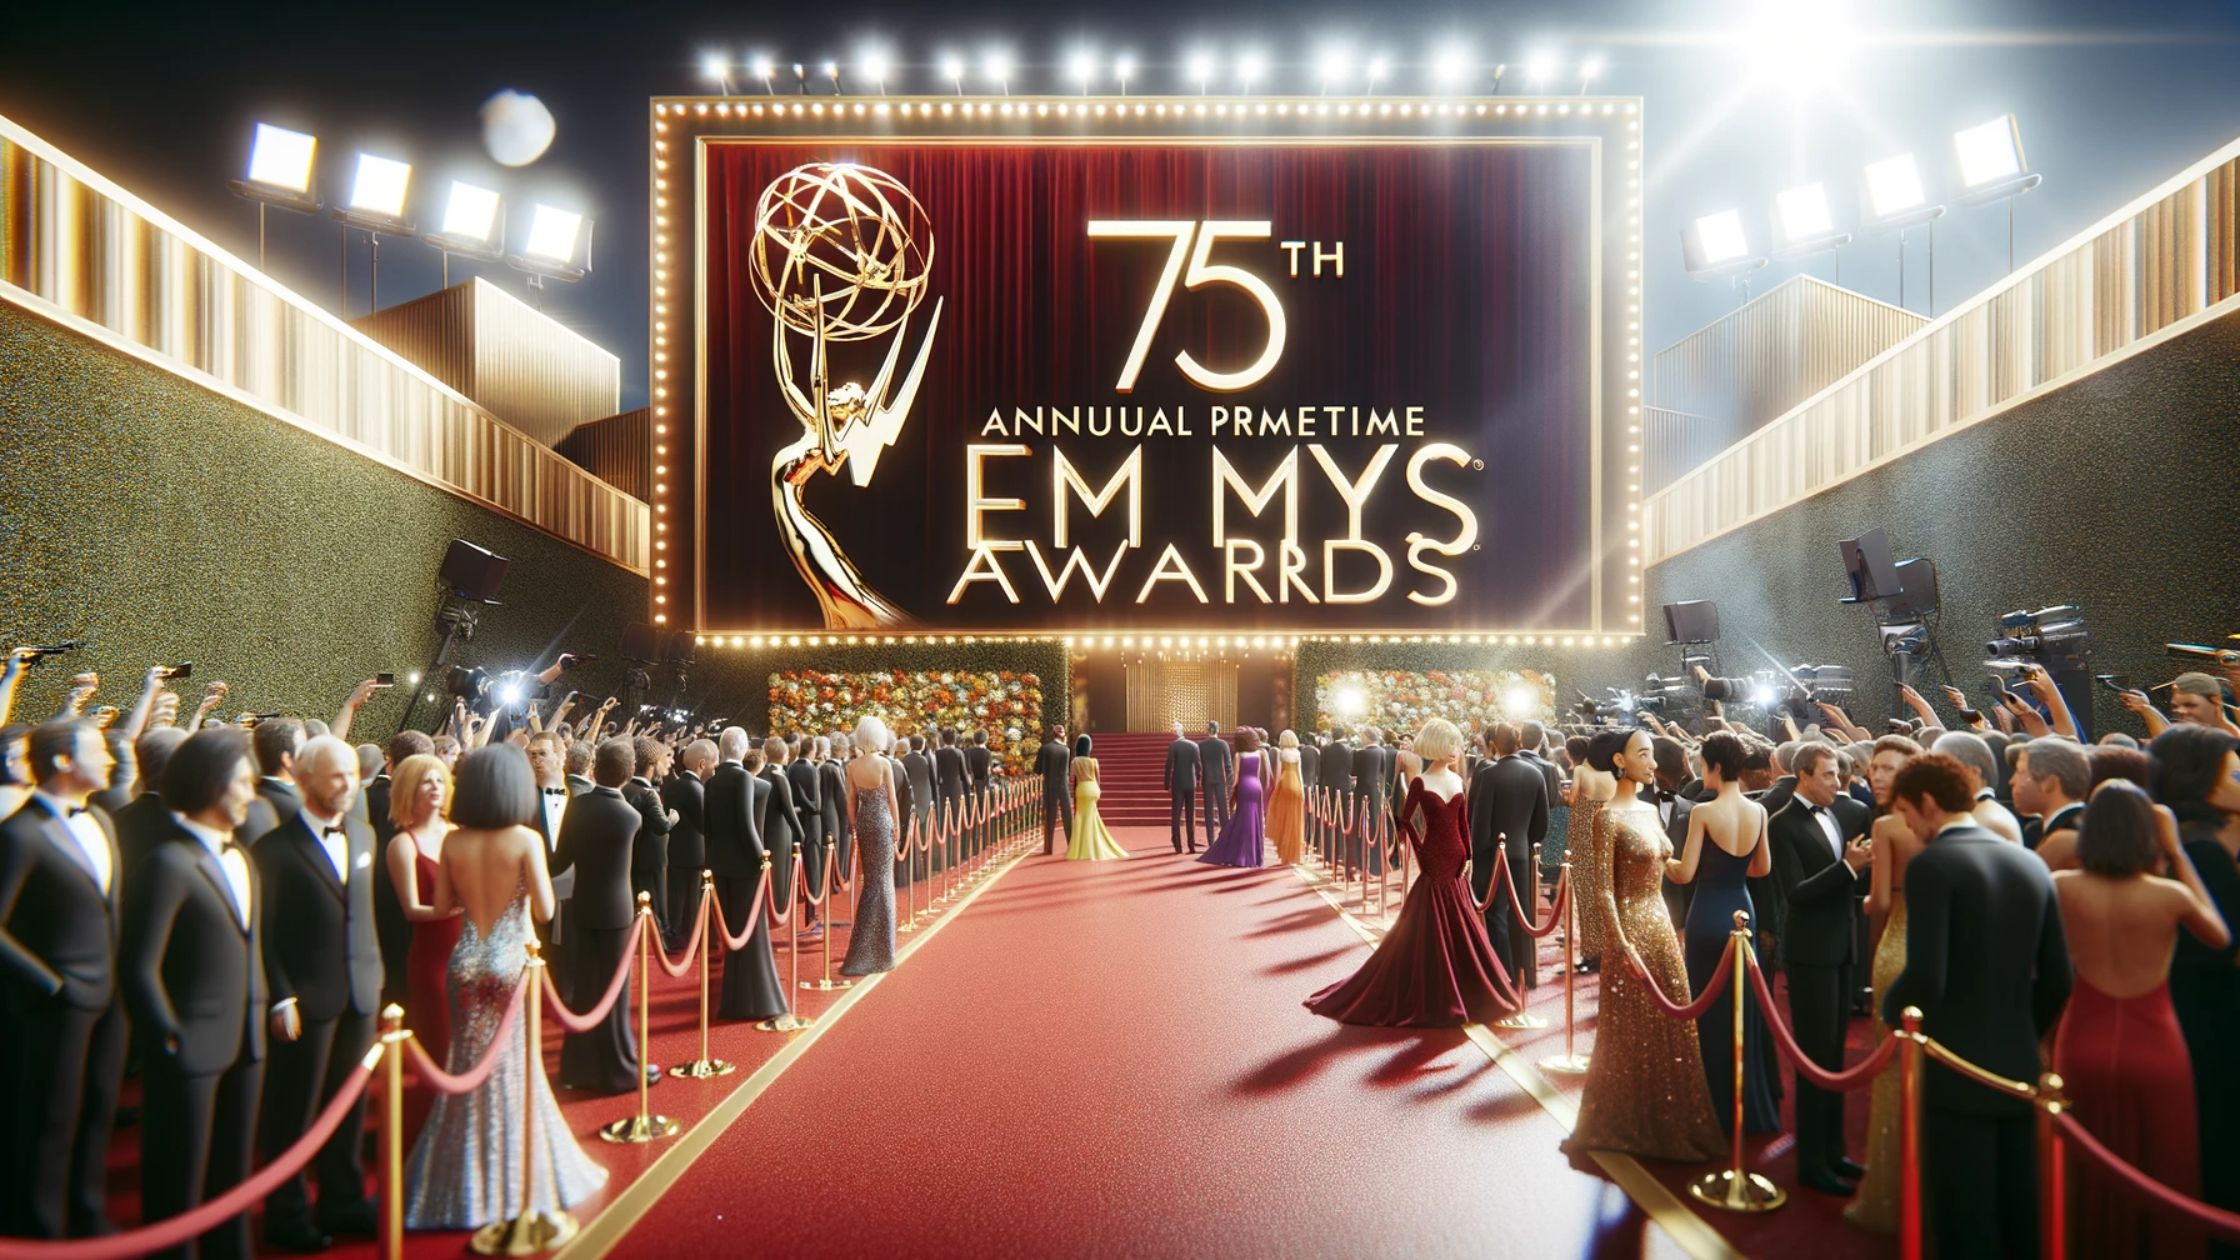 75th Annual Primetime Emmy Awards Everything You Need to Know